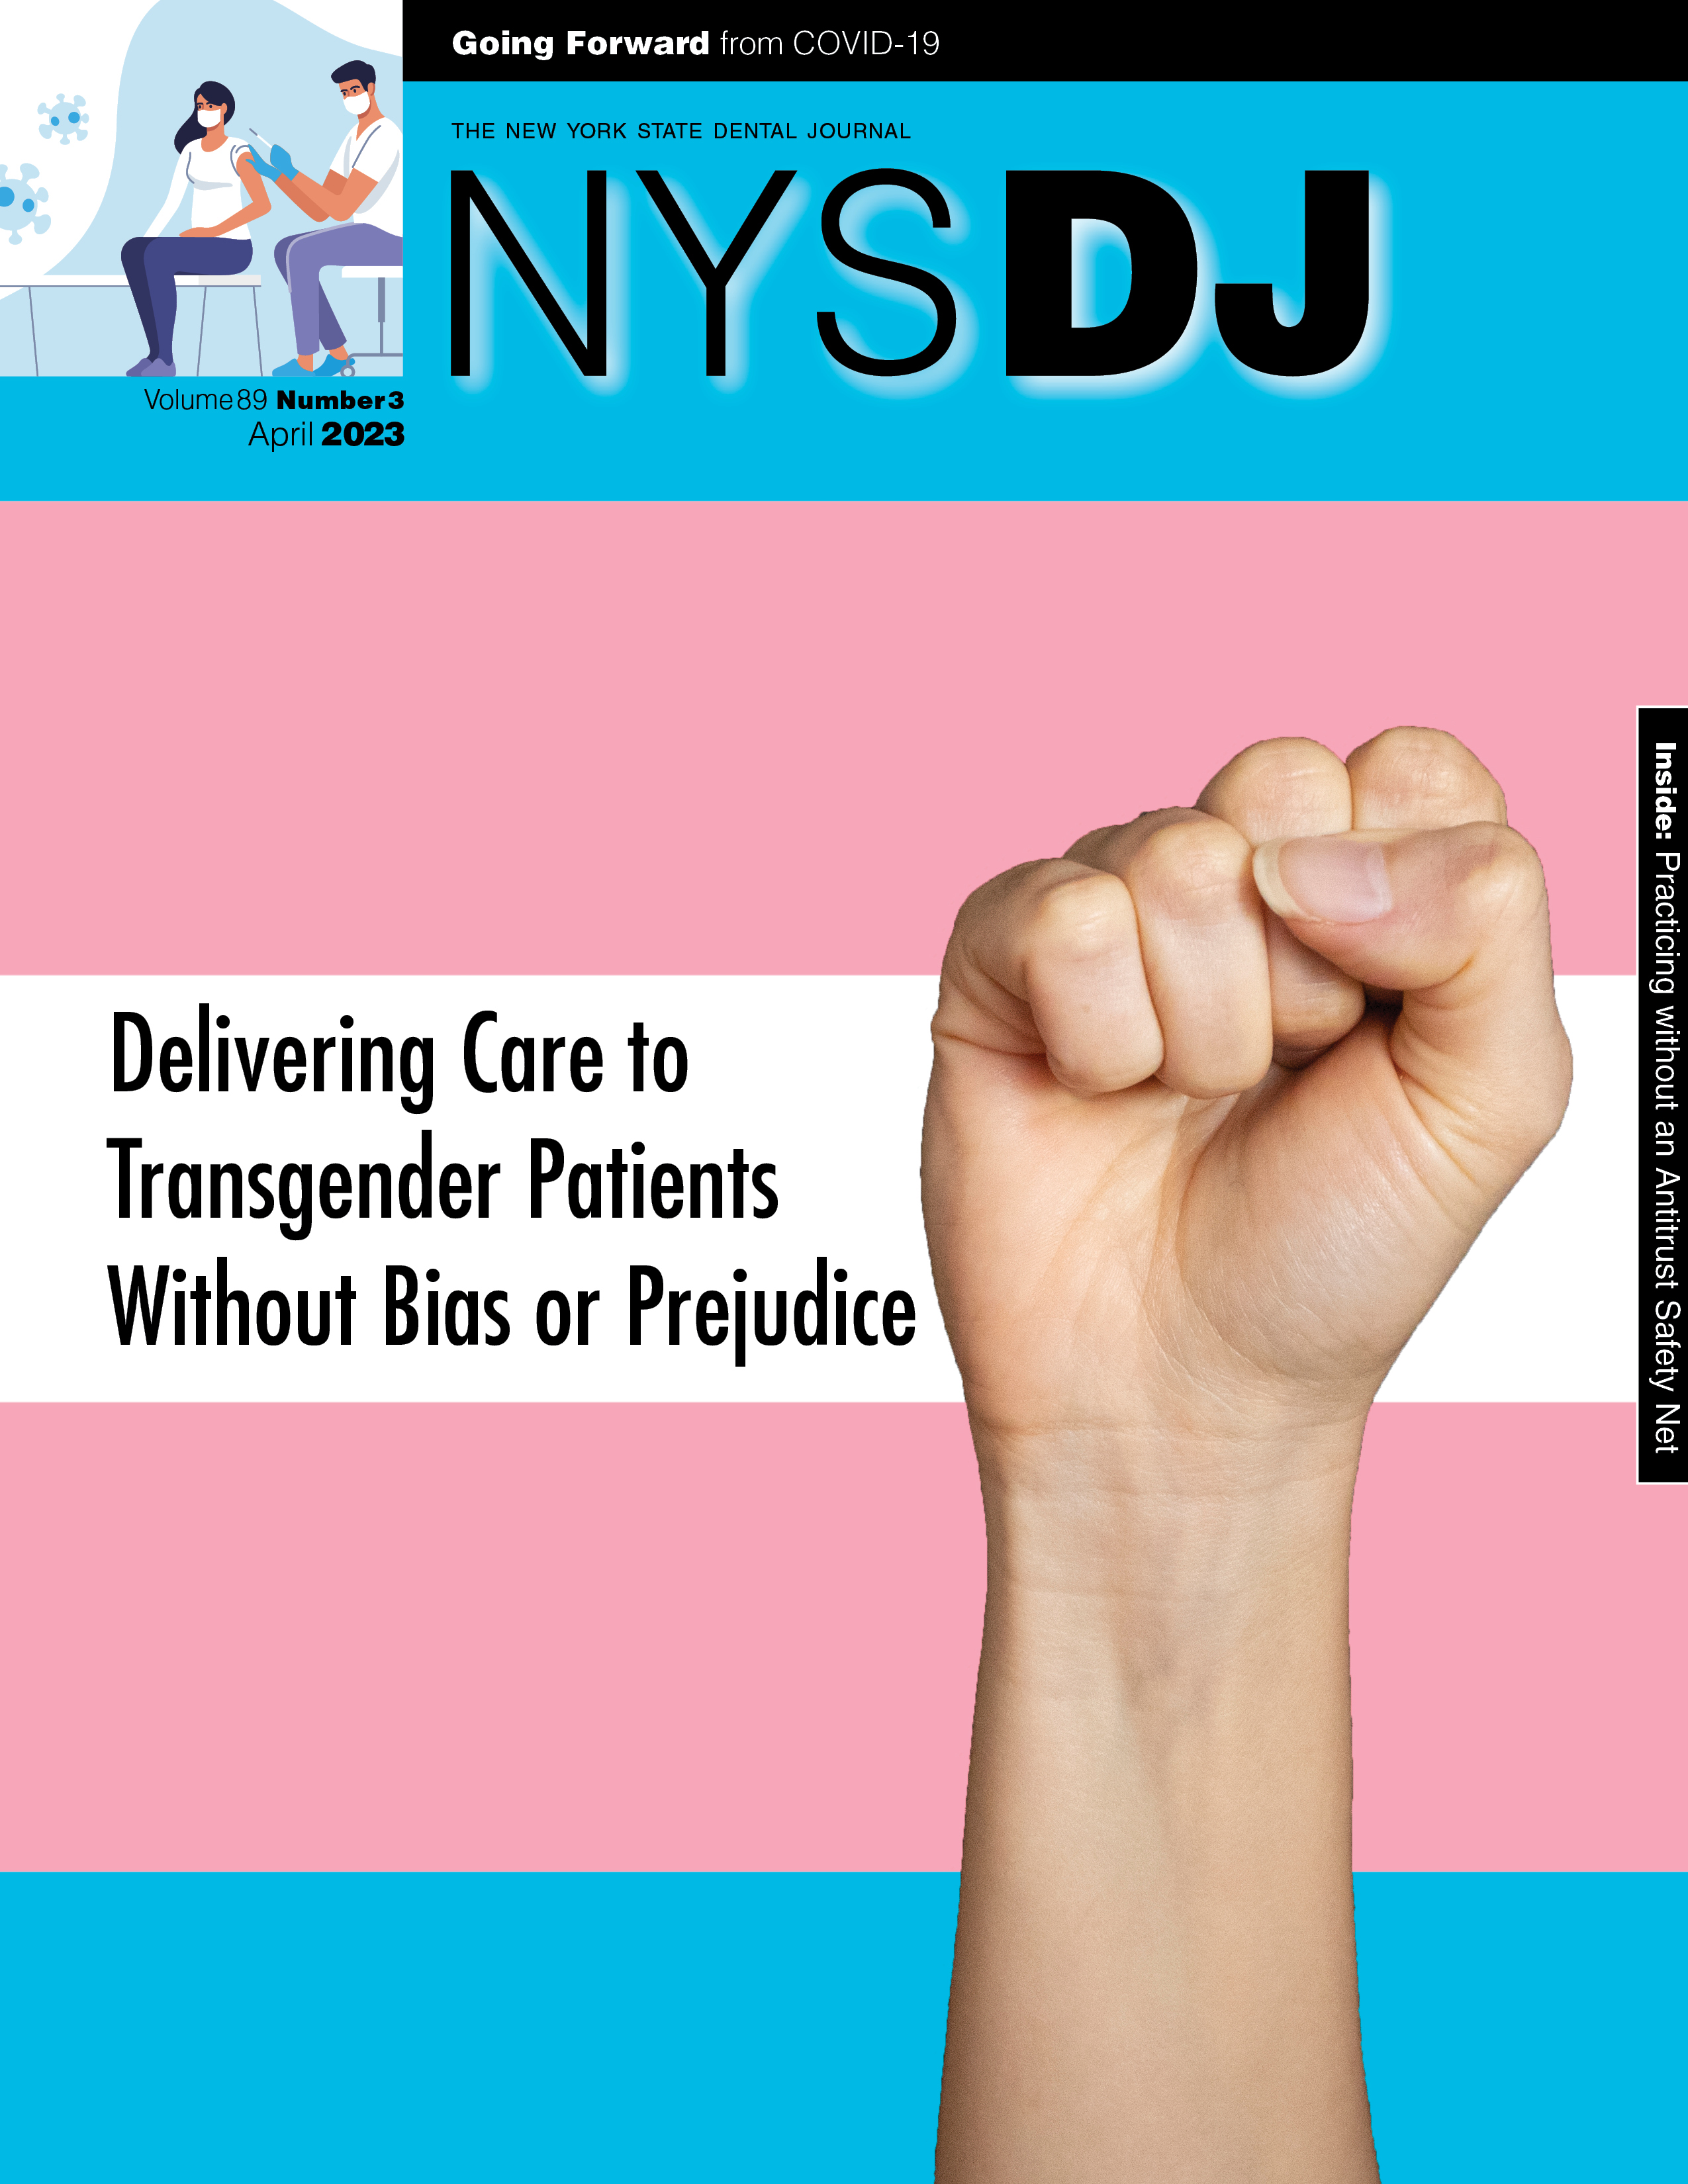 Cover of the NYSDJ with a raised fist in front of the colors of the transgender flag.